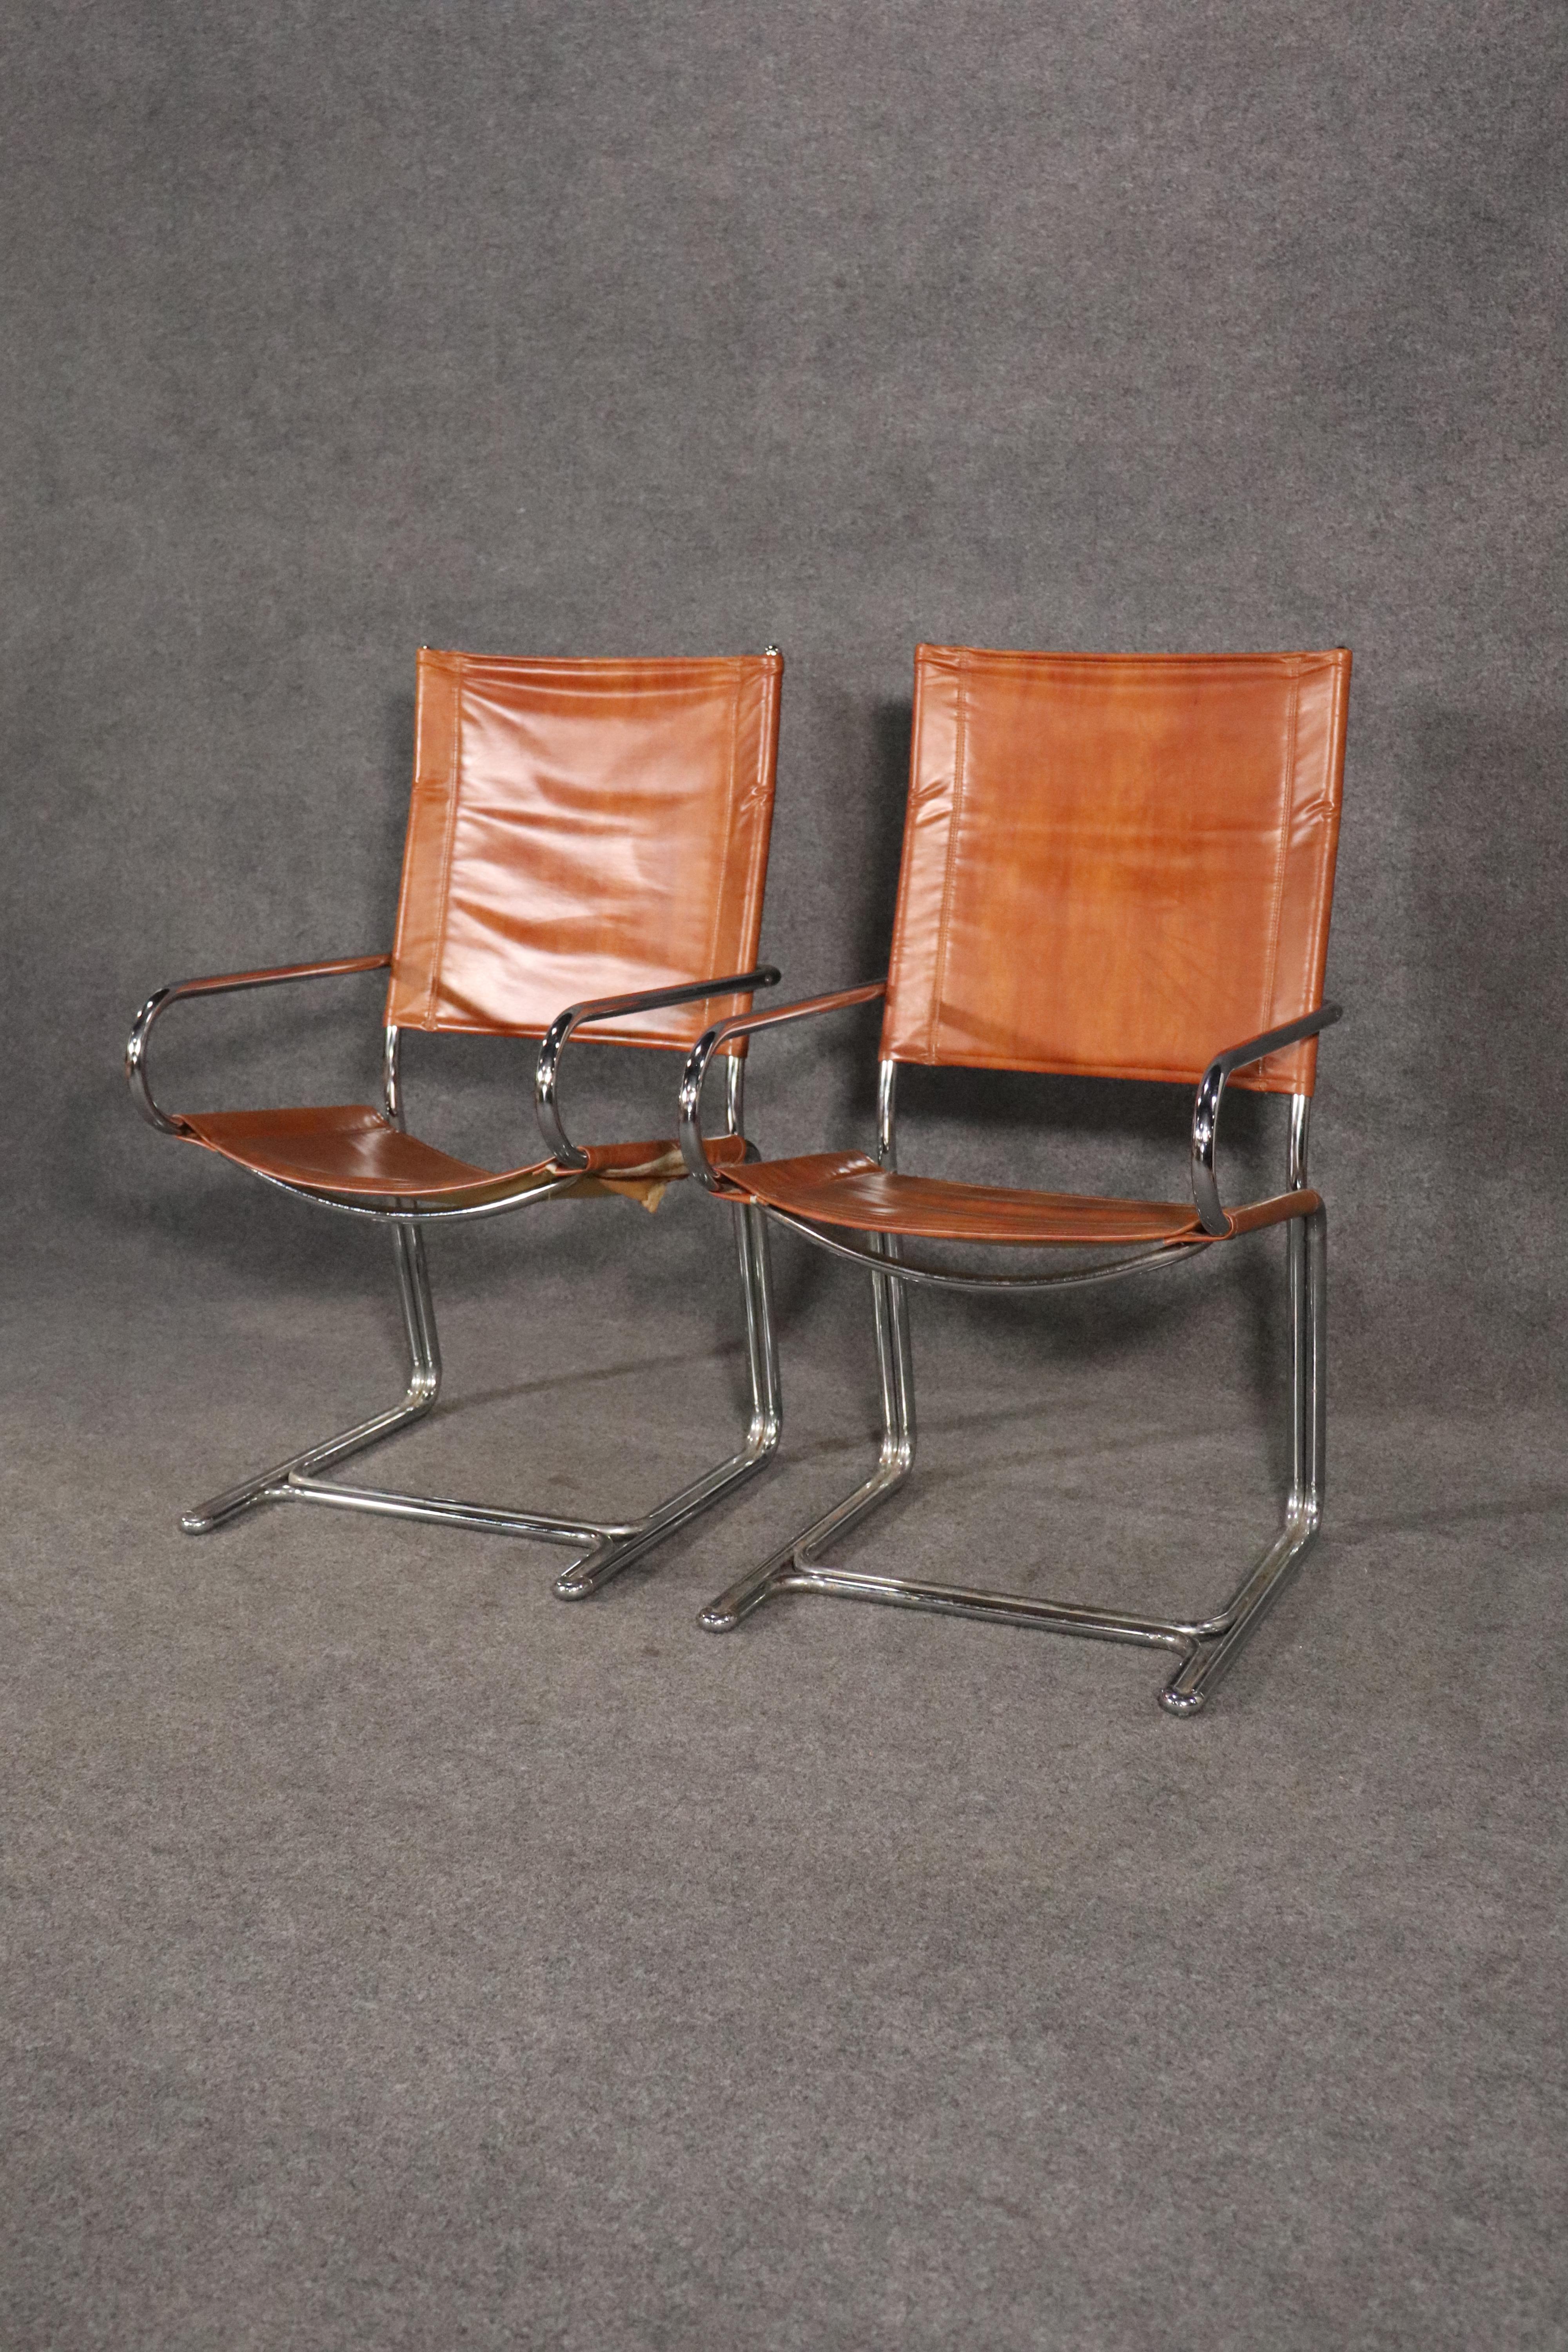 Pair of mid-century modern arm chairs made by Cosco Home Products. Made of strong polished chrome frames, bent to go around the entire chair. Low profile arms, sling leather style fabric, sturdy and stylish.
Please confirm location NY or NJ